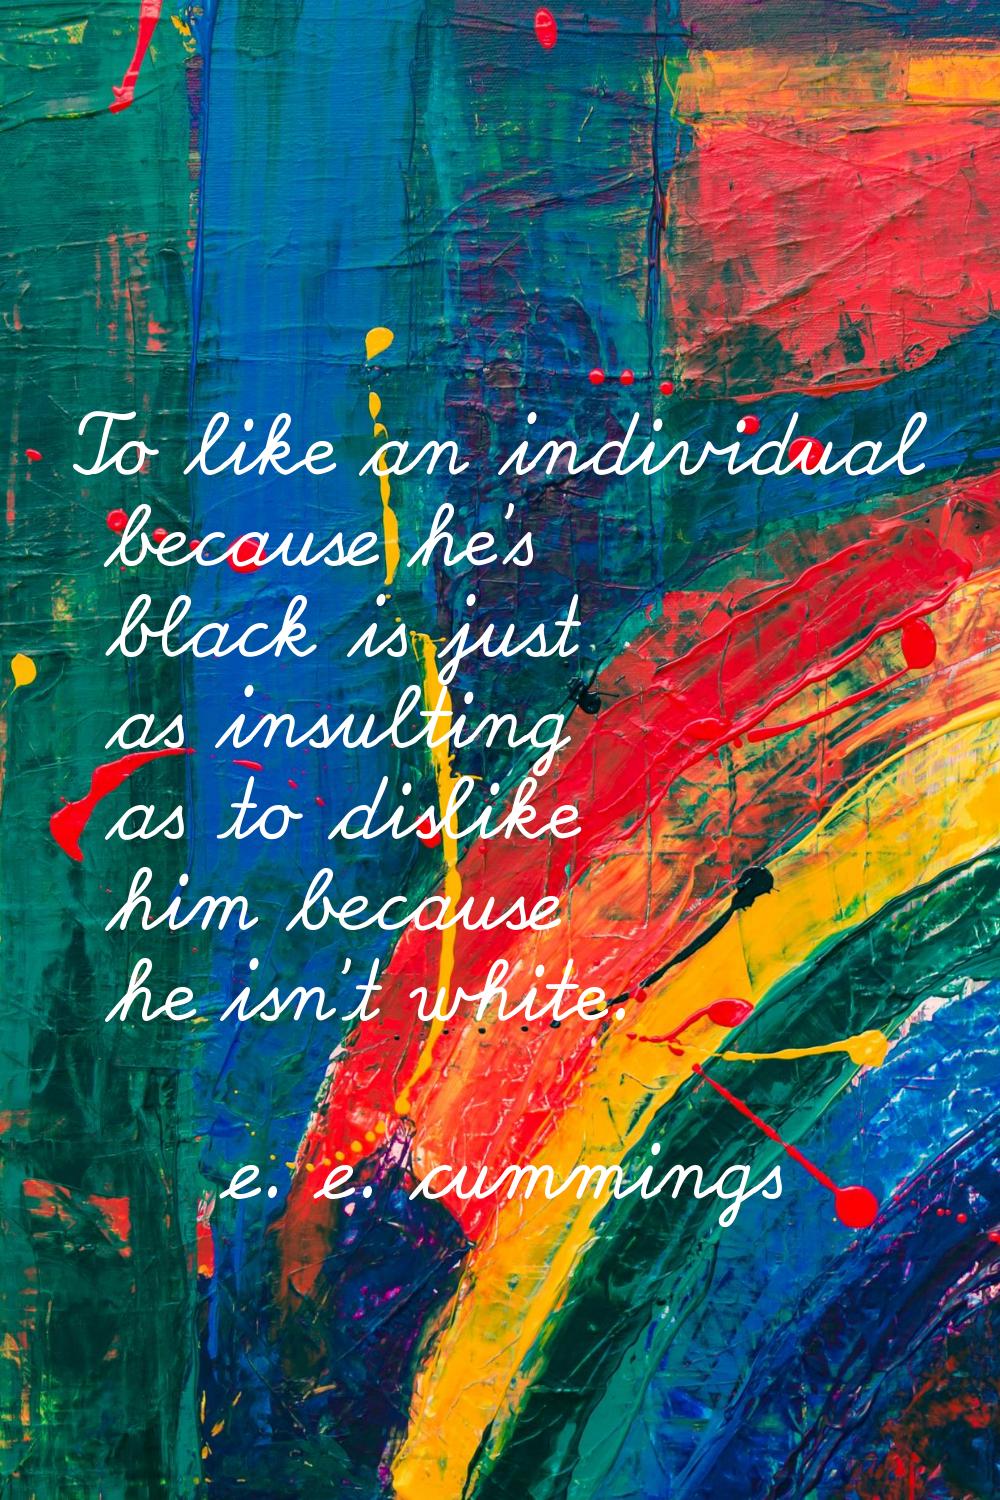 To like an individual because he's black is just as insulting as to dislike him because he isn't wh